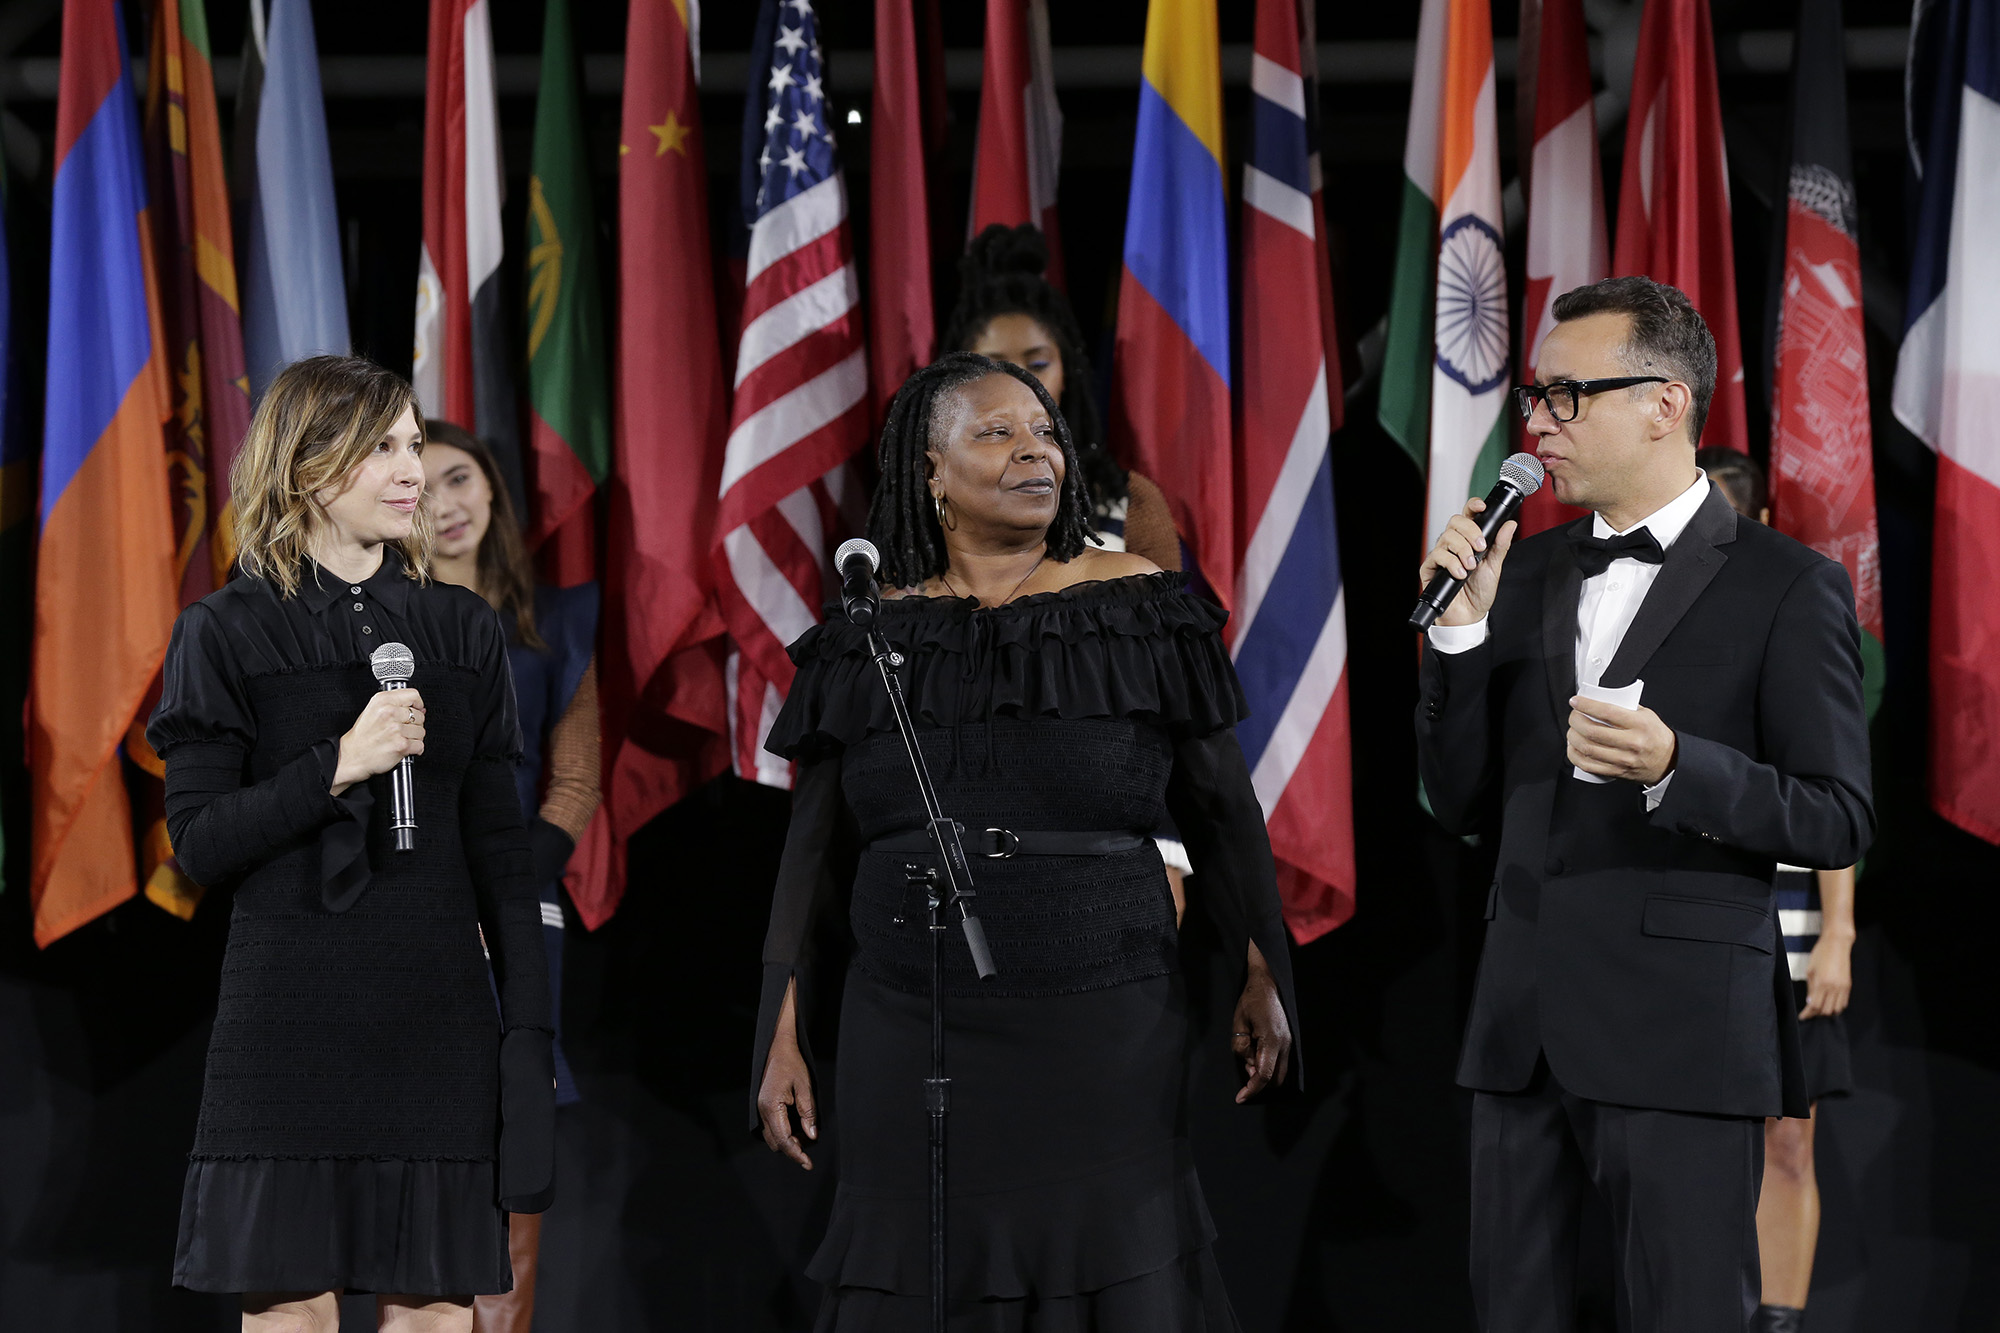 Carrie Brownstein, Whoopi Goldberg, and Fred Armisen speak onstage during the Opening Ceremony fashion show during New York Fashion Week at Jacob Javits Center on September 11, 2016 in New York City.  (Photo by JP Yim/Getty Images) (JP Yim&mdash;Getty Images)